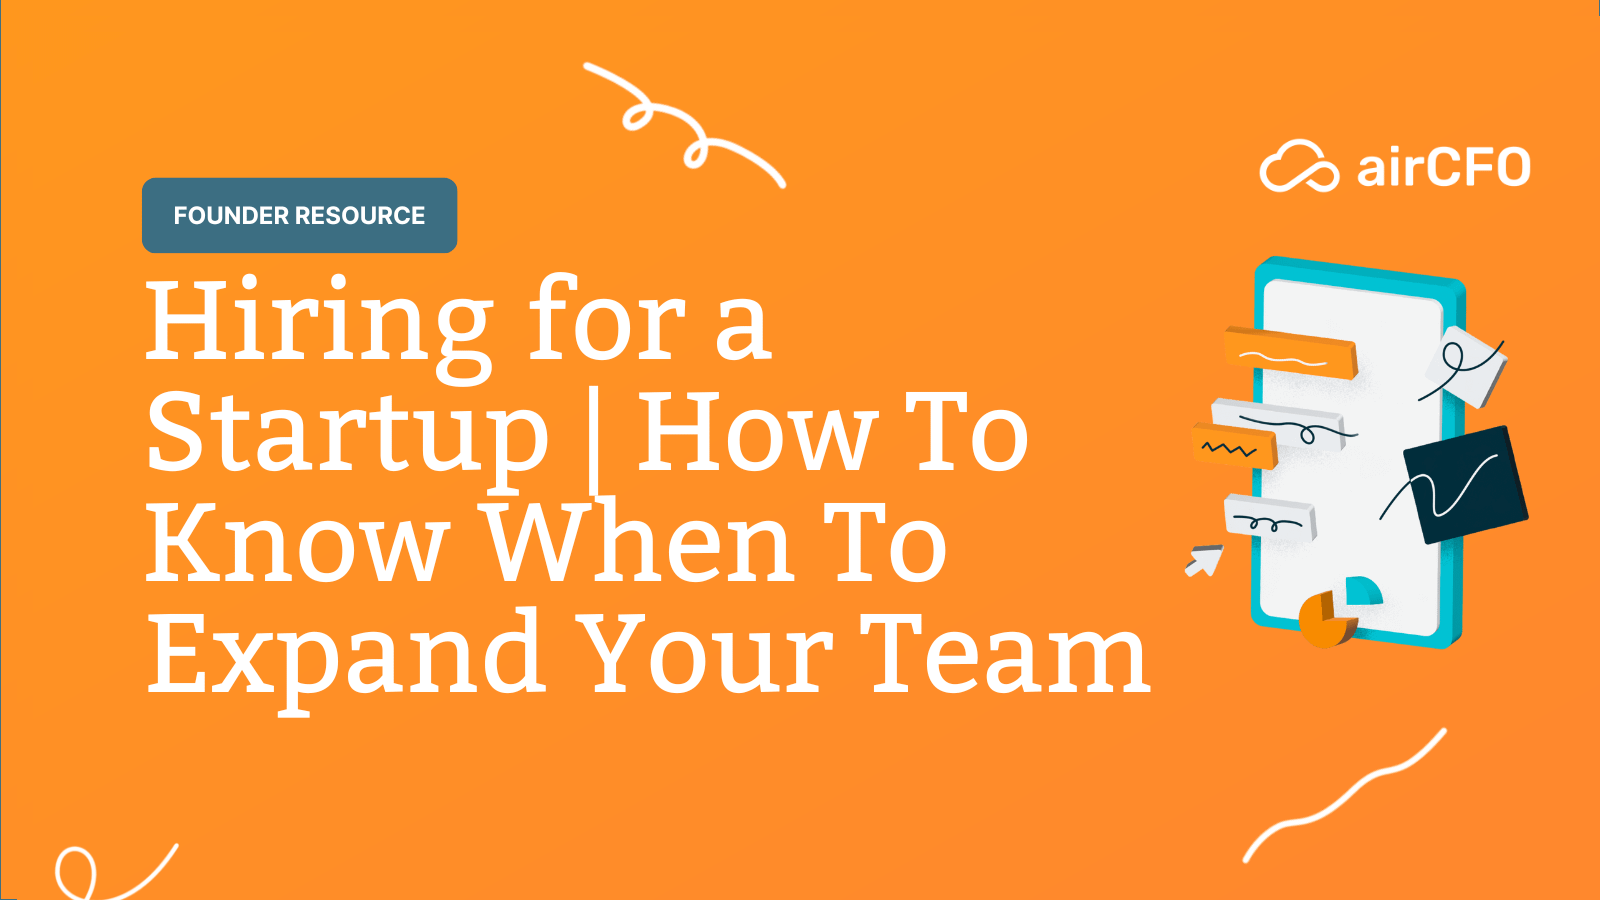 Hiring for a Startup | How To Know When To Expand Your Team